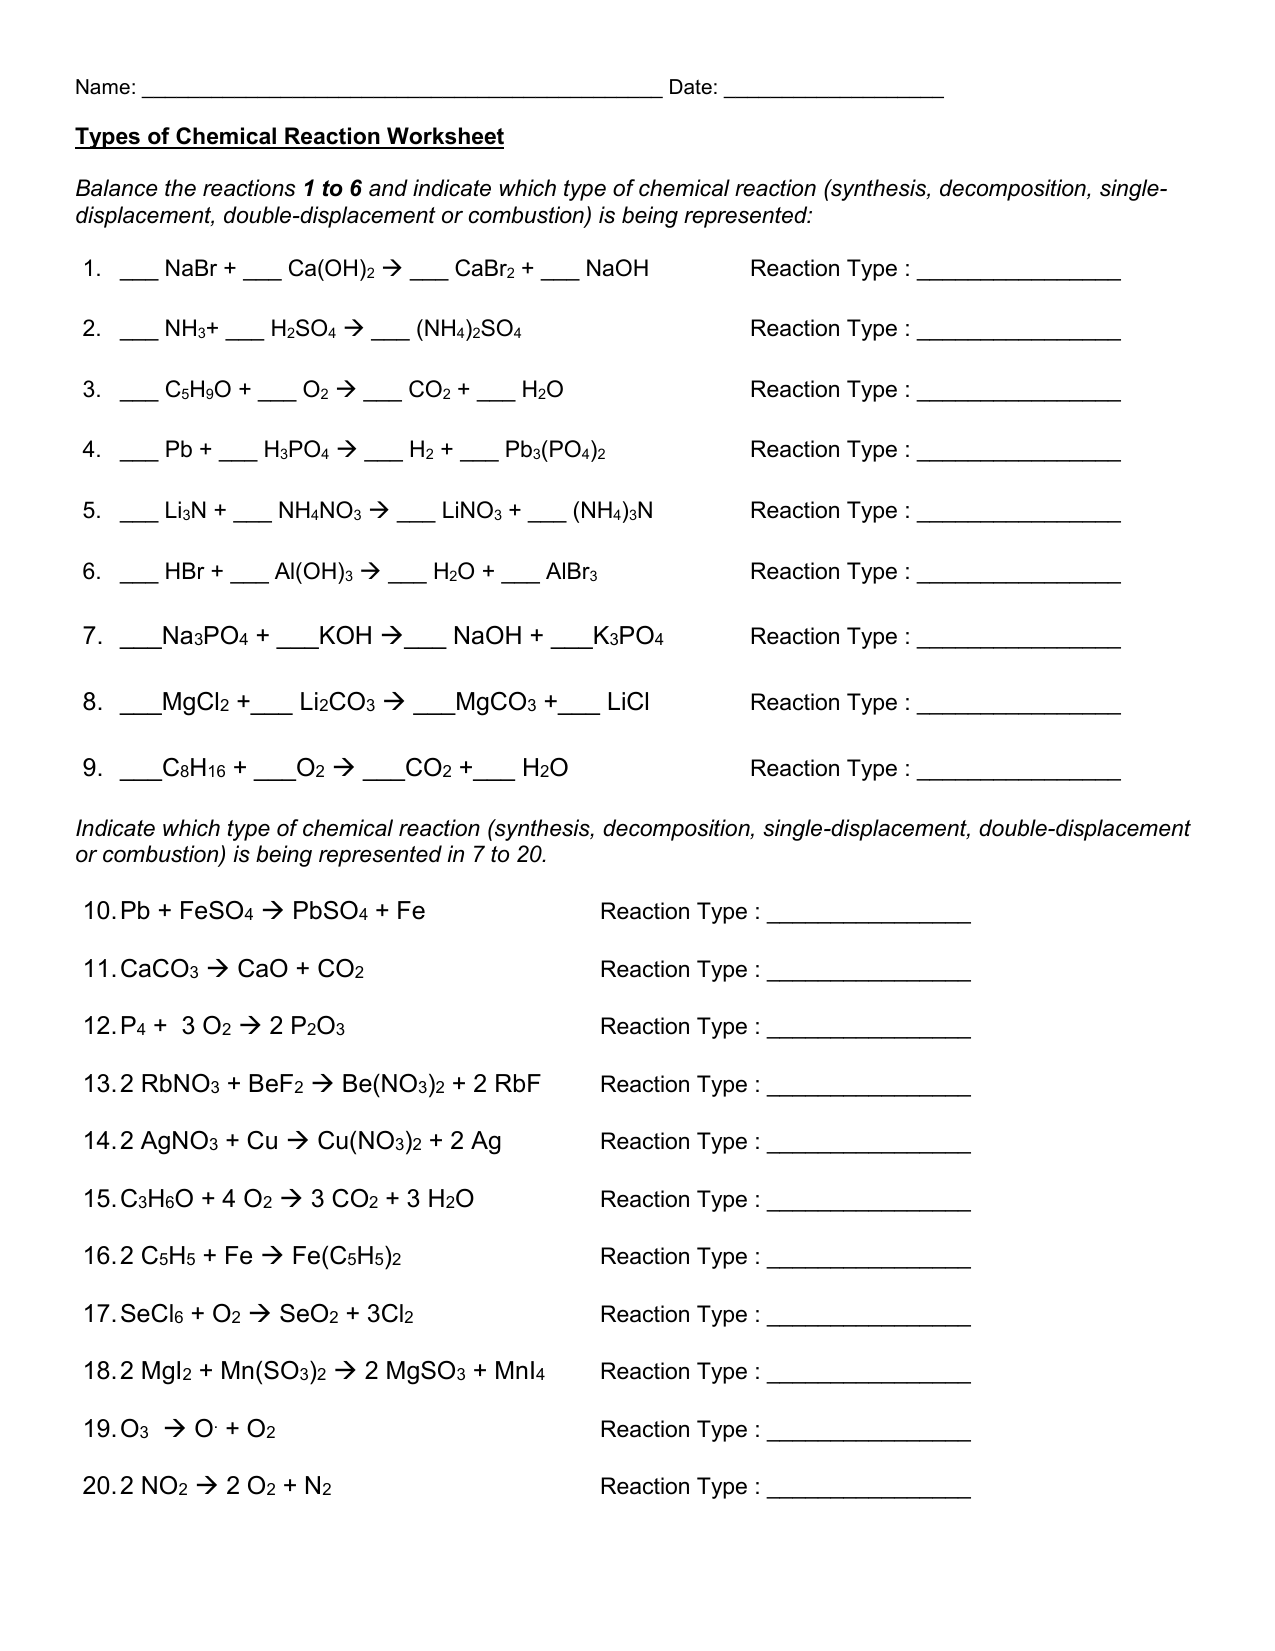 Types of Chemical Reaction Worksheet Intended For Types Of Reactions Worksheet Answers